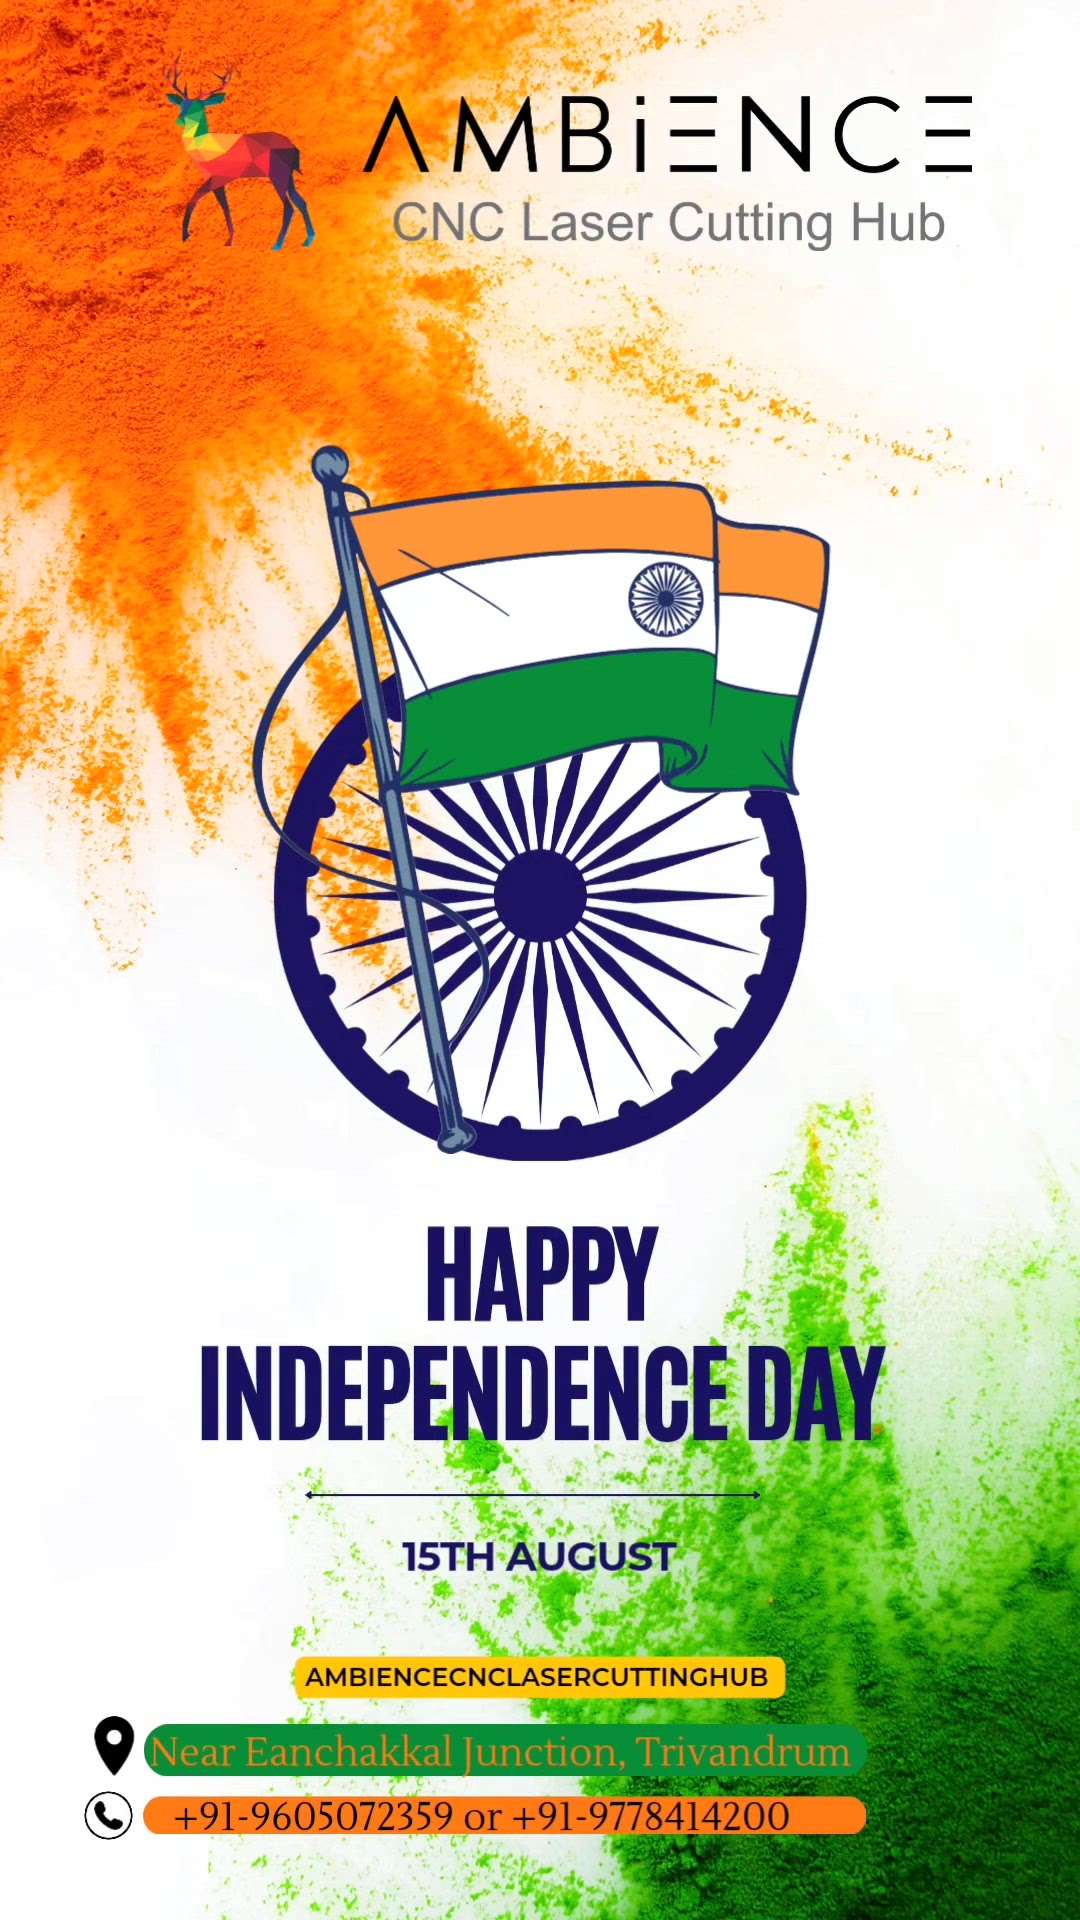 🇮🇳Happy Independence Day To All 🇮🇳
Proud To Be An INDIAN 🤩
#indianinteriors #independenceday #loveindia #interiors #ambiencecnccuttinghub #ambienceservices #ambiencefactoryoutlet #ambienceeanchakkal
+91-9605072359 or +91-9778414200